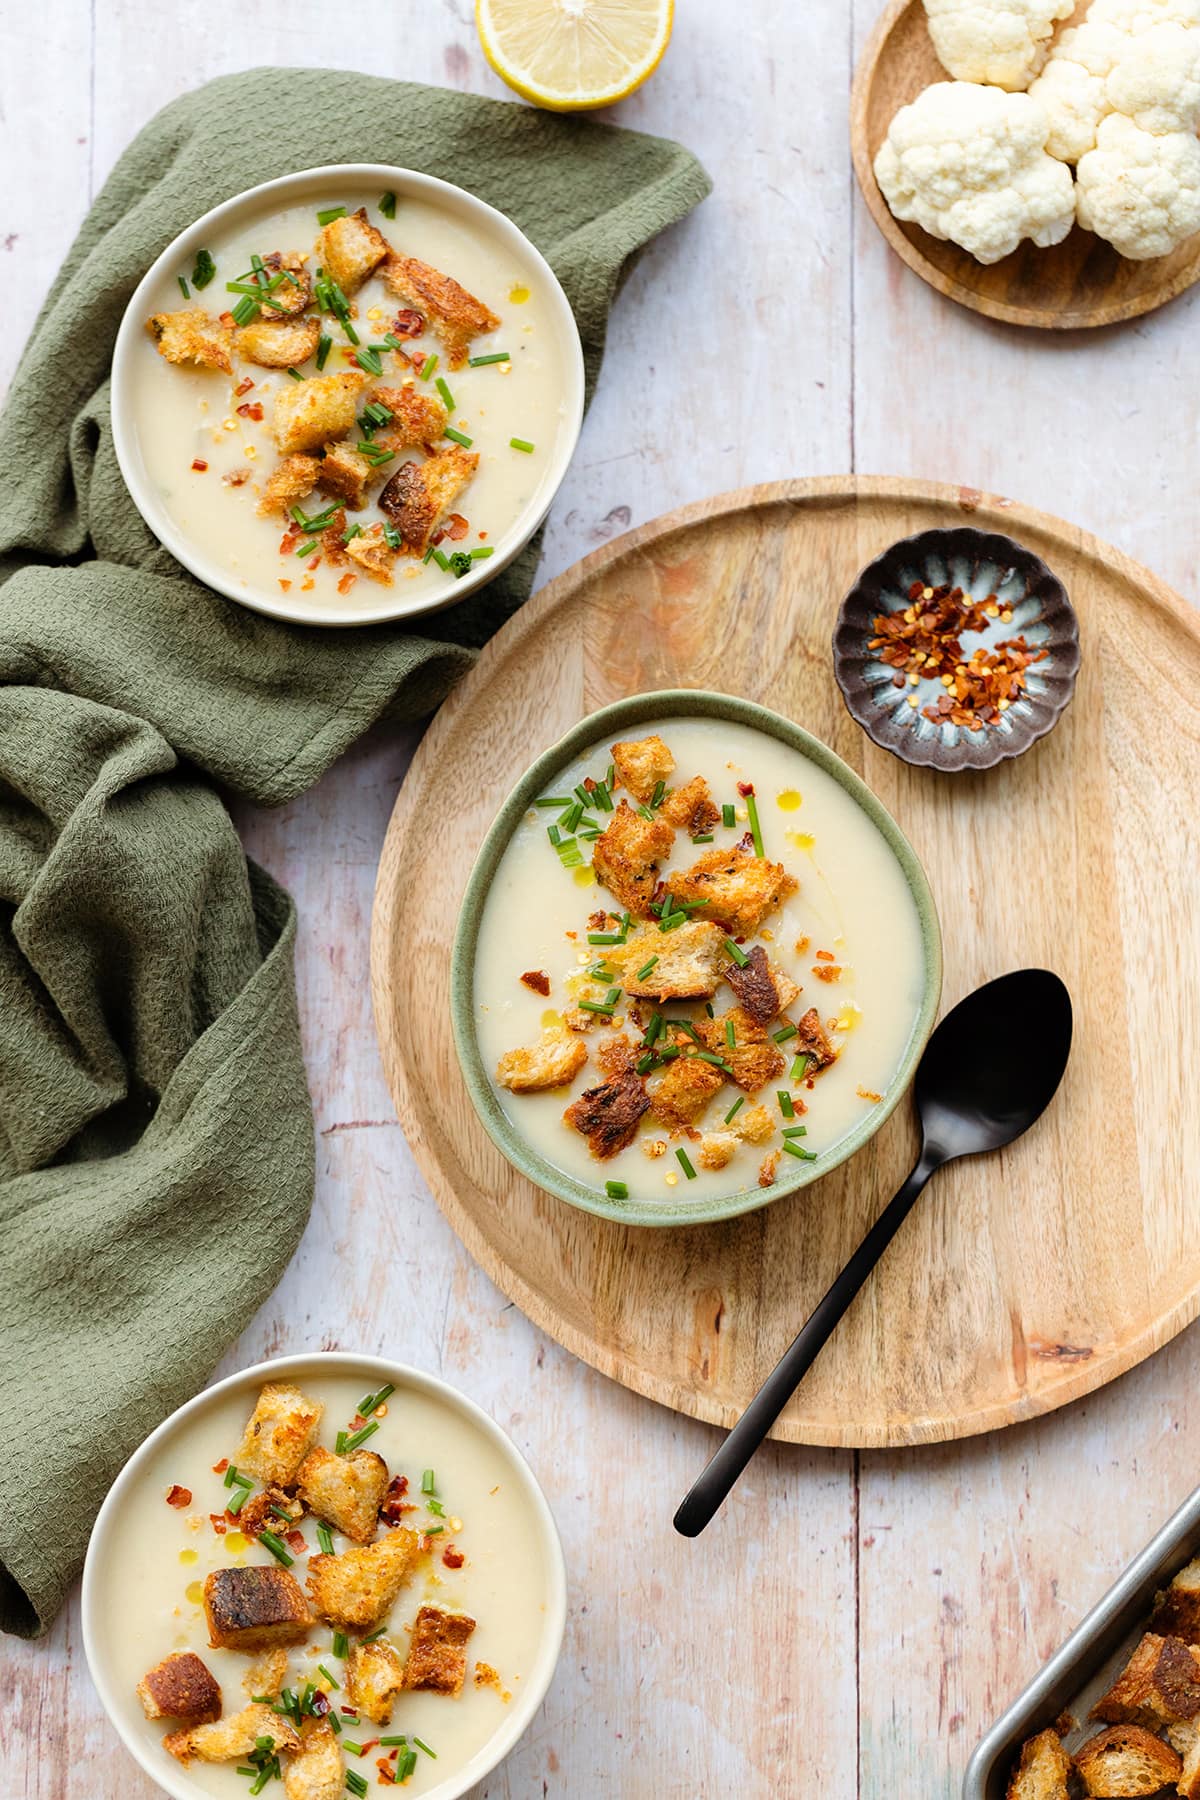 Cauliflower soup topped with croutons and fresh herbs in a white and green bowls on a wooden background.